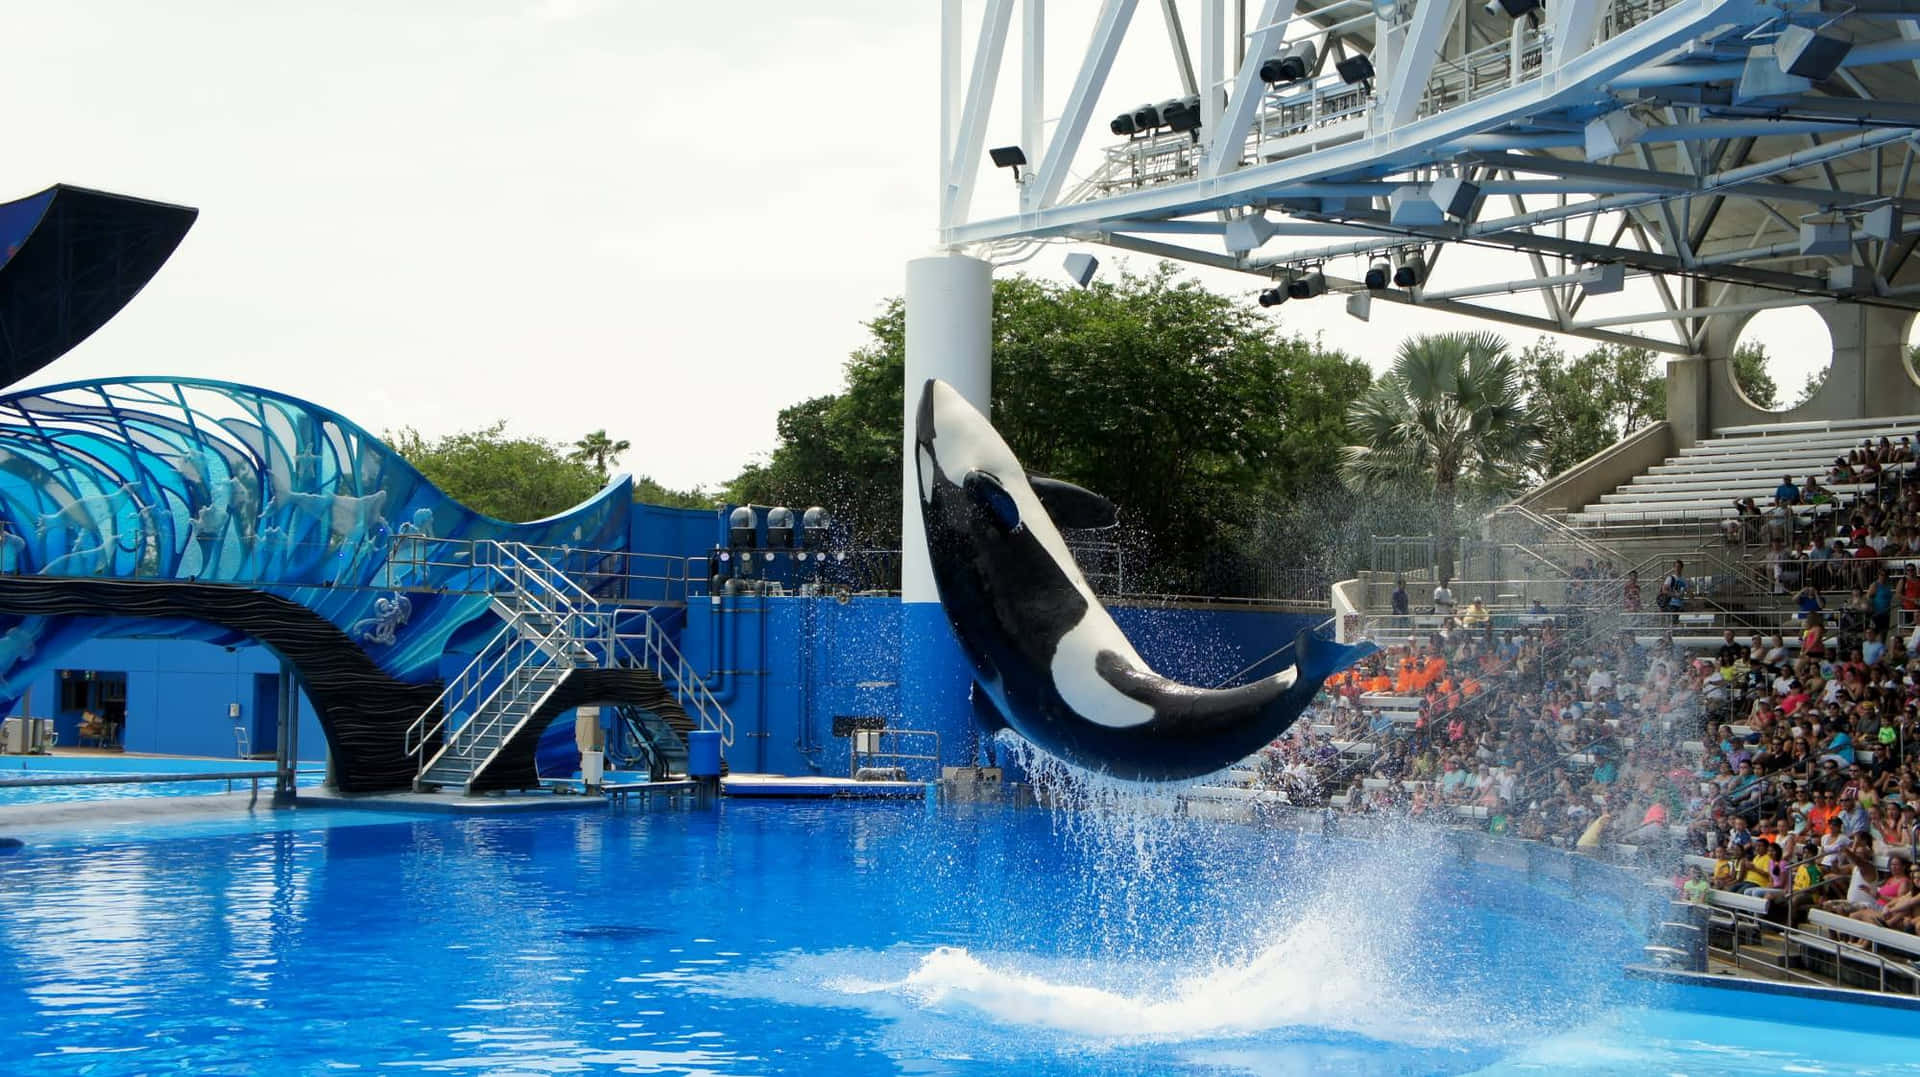 Dive into Seaworld and Get Ready to Make a Splash!